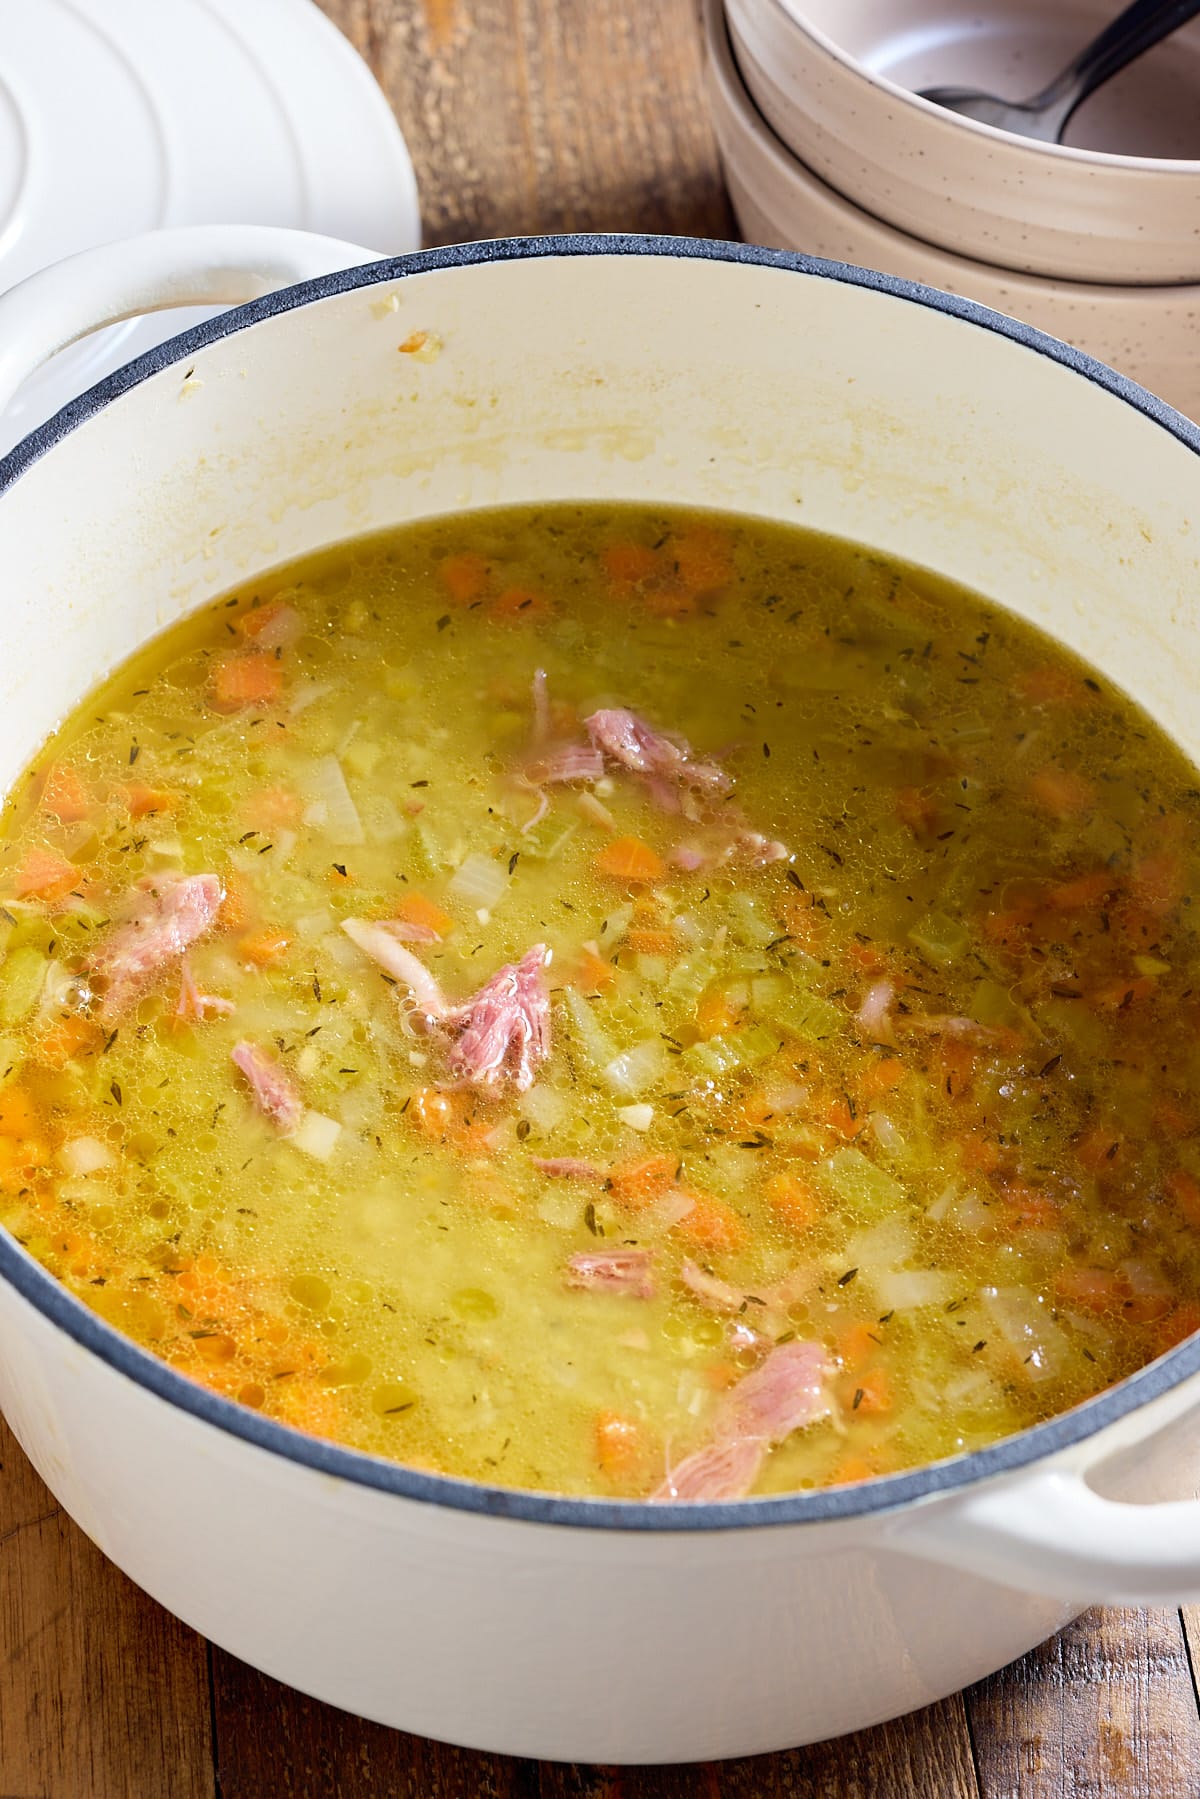 split pea soup with meat from the ham bone in the pot.